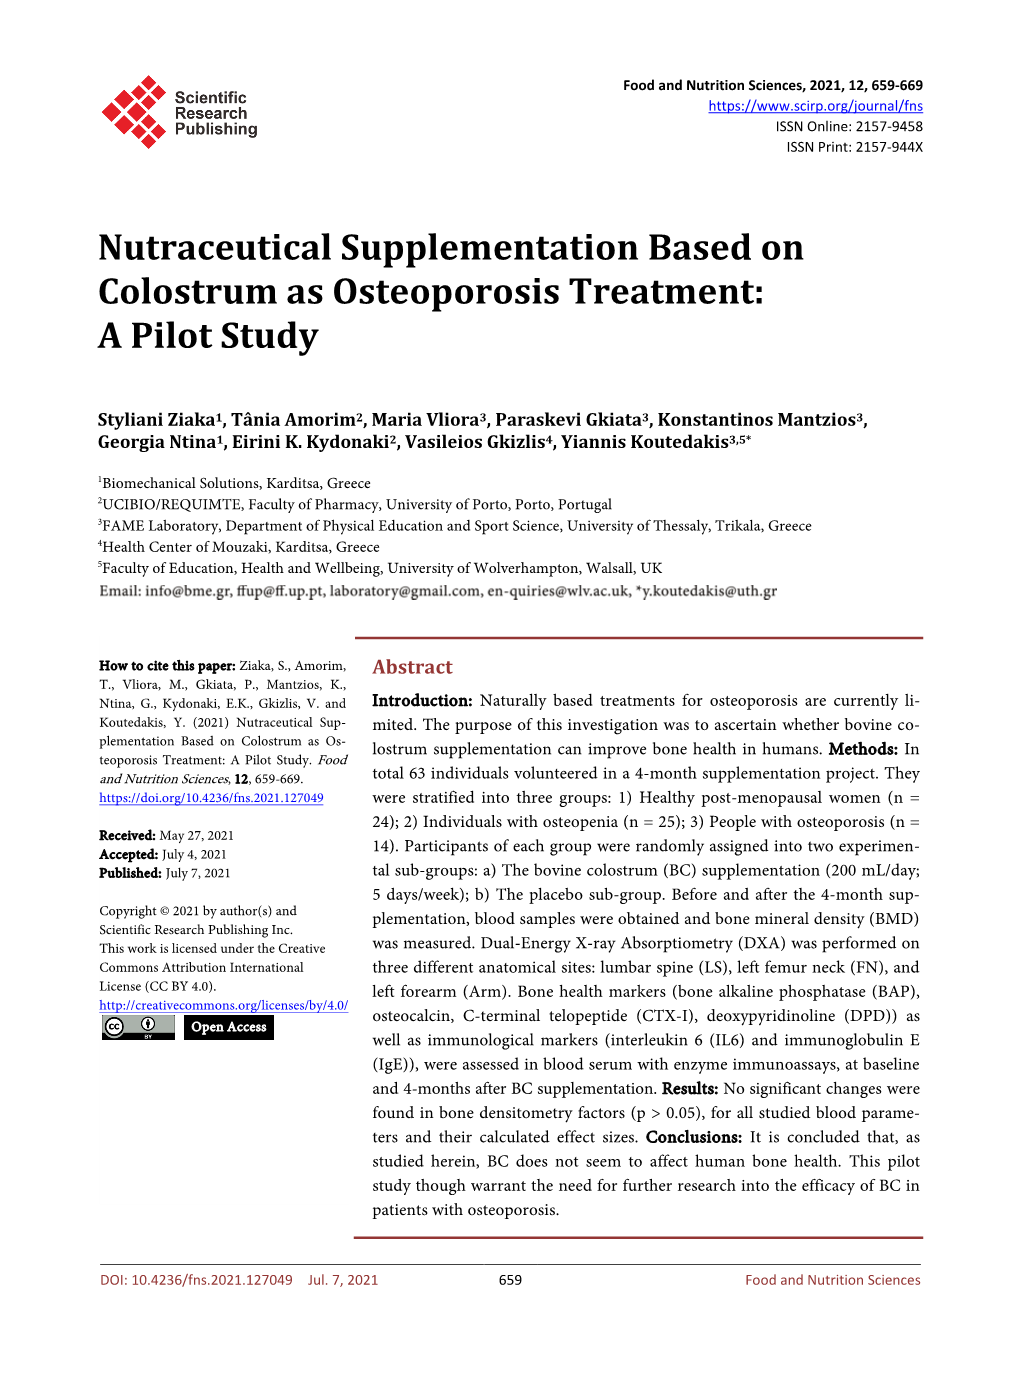 Nutraceutical Supplementation Based on Colostrum As Osteoporosis Treatment: a Pilot Study